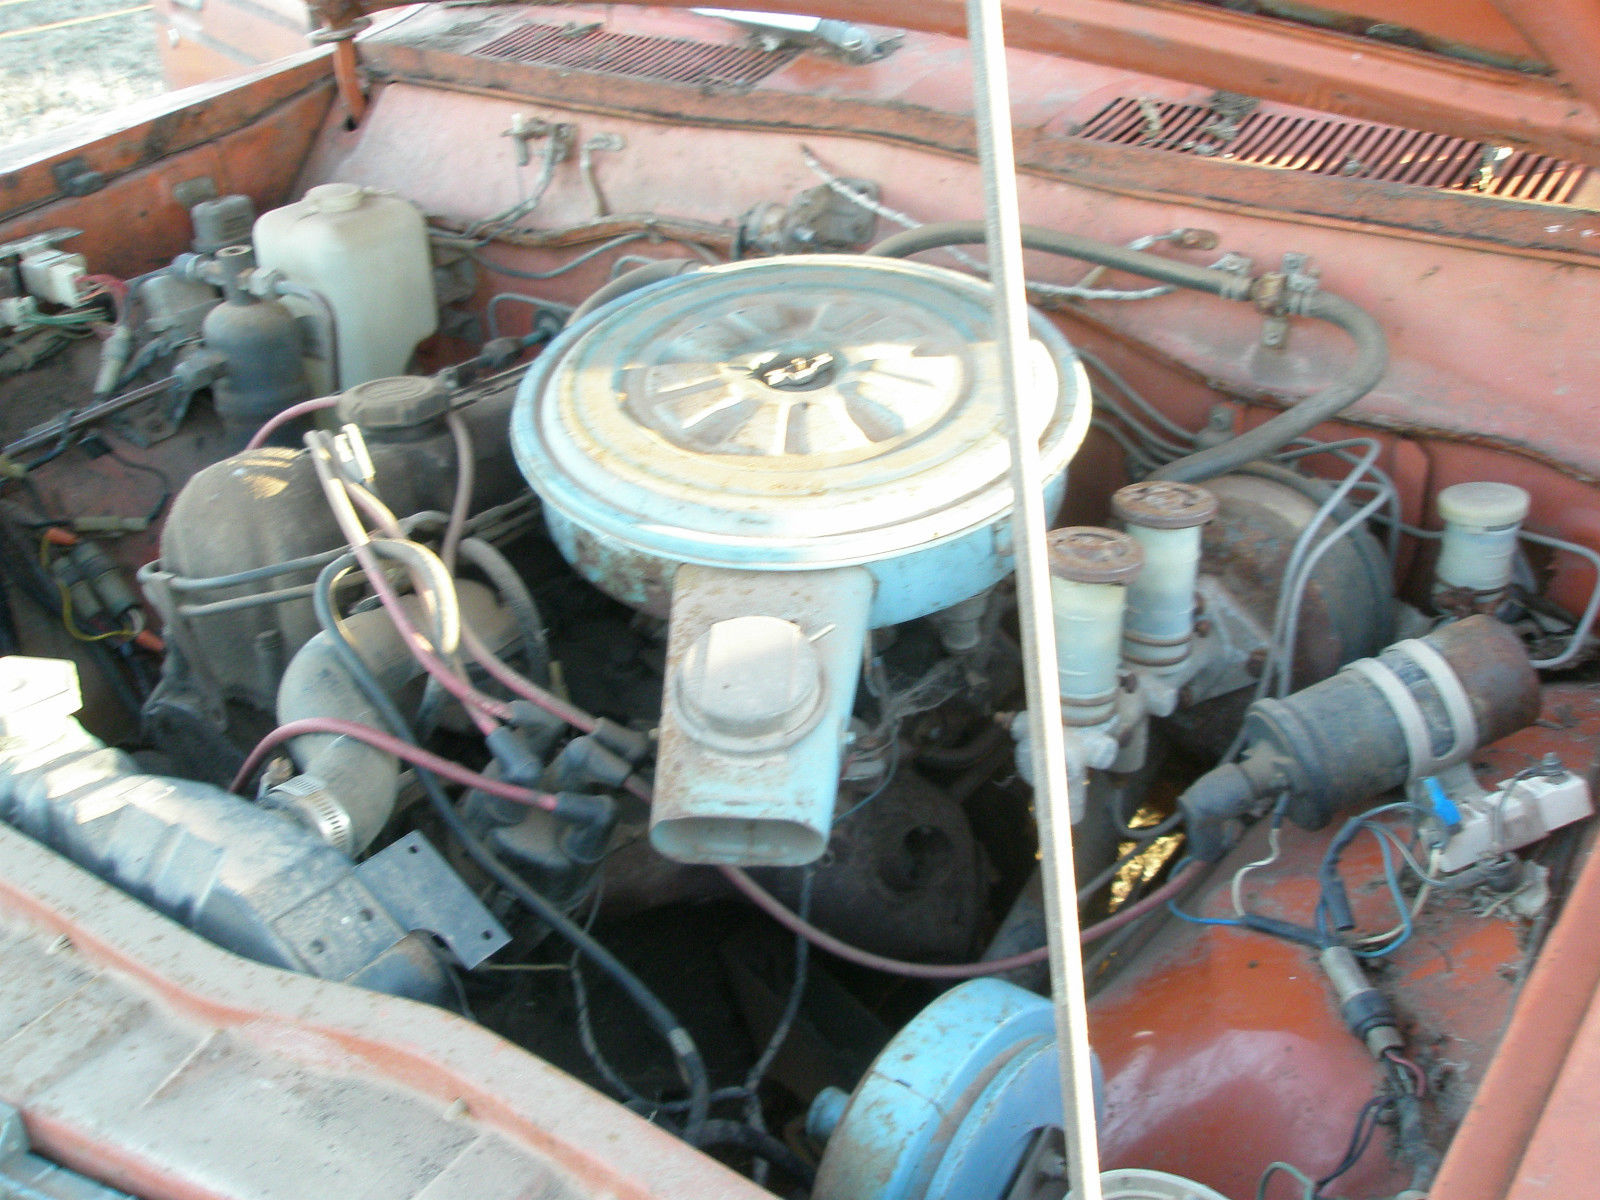 1977 Datsun 620 King Cab Pick Up L20B 4 cylinder Engine for sale in Enid, Oklahoma, United States